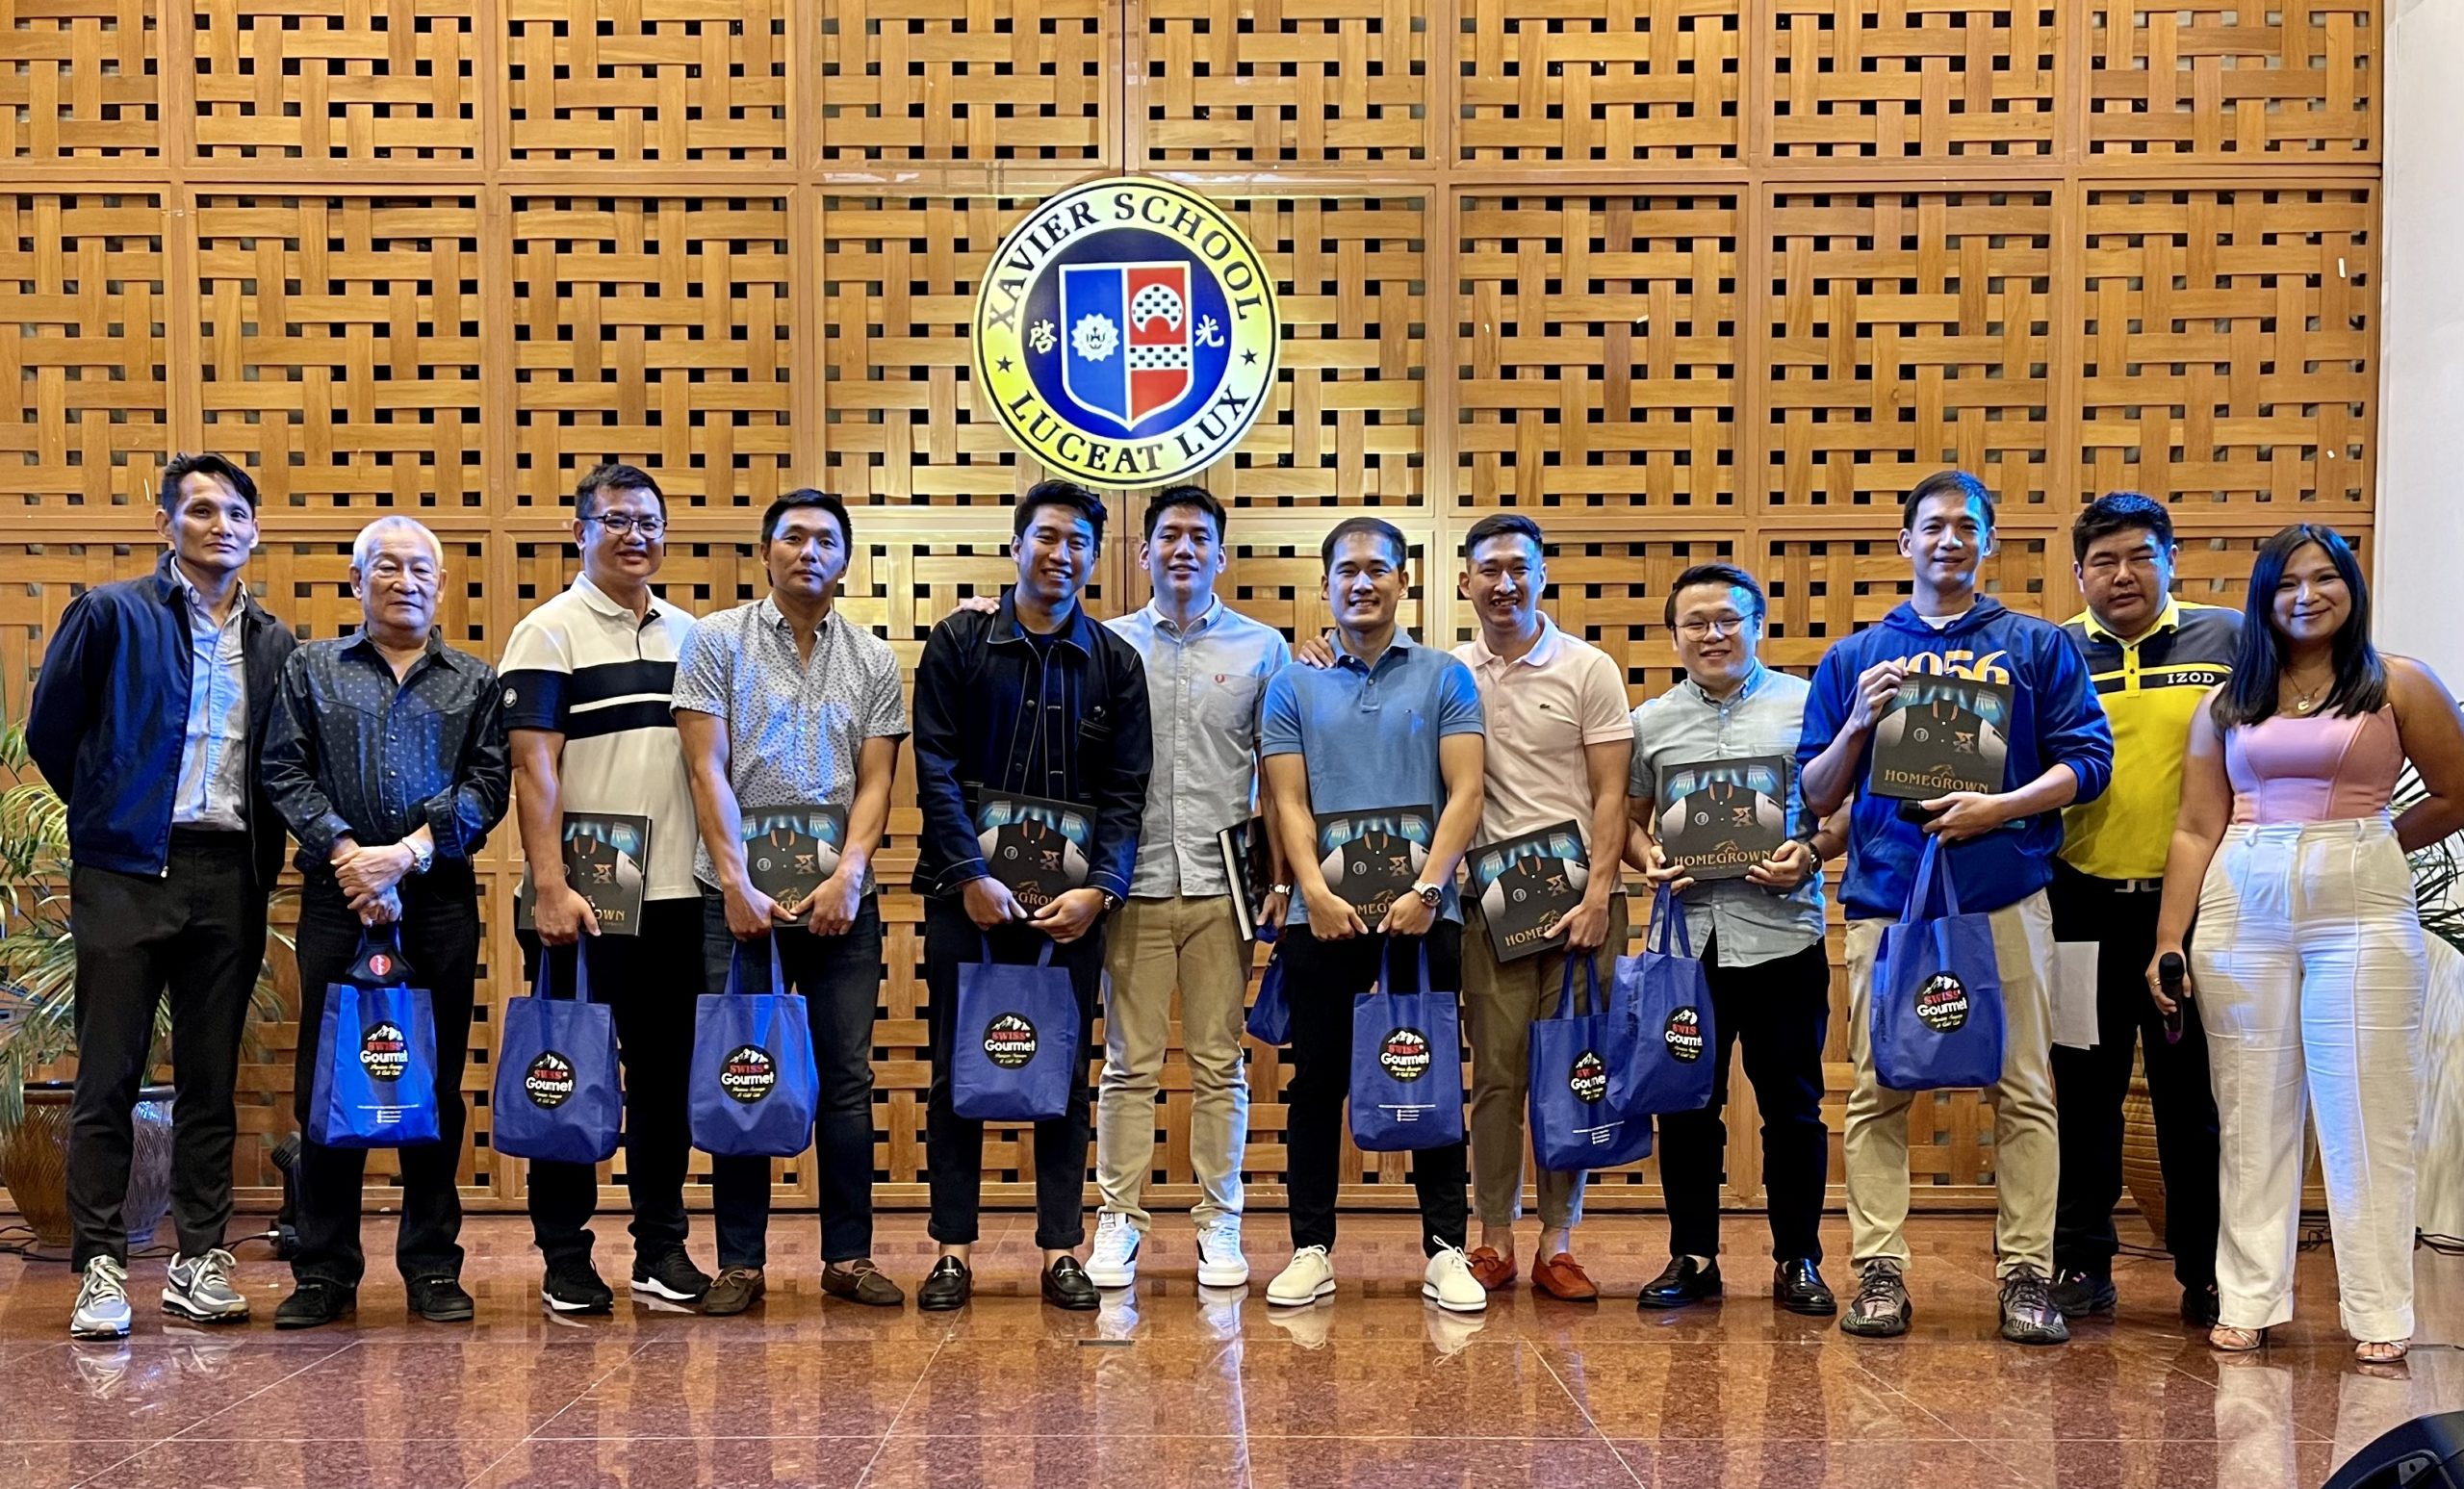 Former Xavier School standouts during the book launching of “Homegrown: A Celebration of Xavier Sports” last Monday, April 4 at the Angelo King Center inside Xavier School in San Juan. In photo are, from left, Jean Alabanza, Jerry Ngo, Eric Yao, Joseph Yeo, Jett Manuel, Jeron Teng, Kyles Lao, Jarrell Lim, Patrick Syquiatco, Chris Tiu, Alumni Association of Xavier School Vice President for Sports Oliver Gan, and co-host Eilieen Shi.